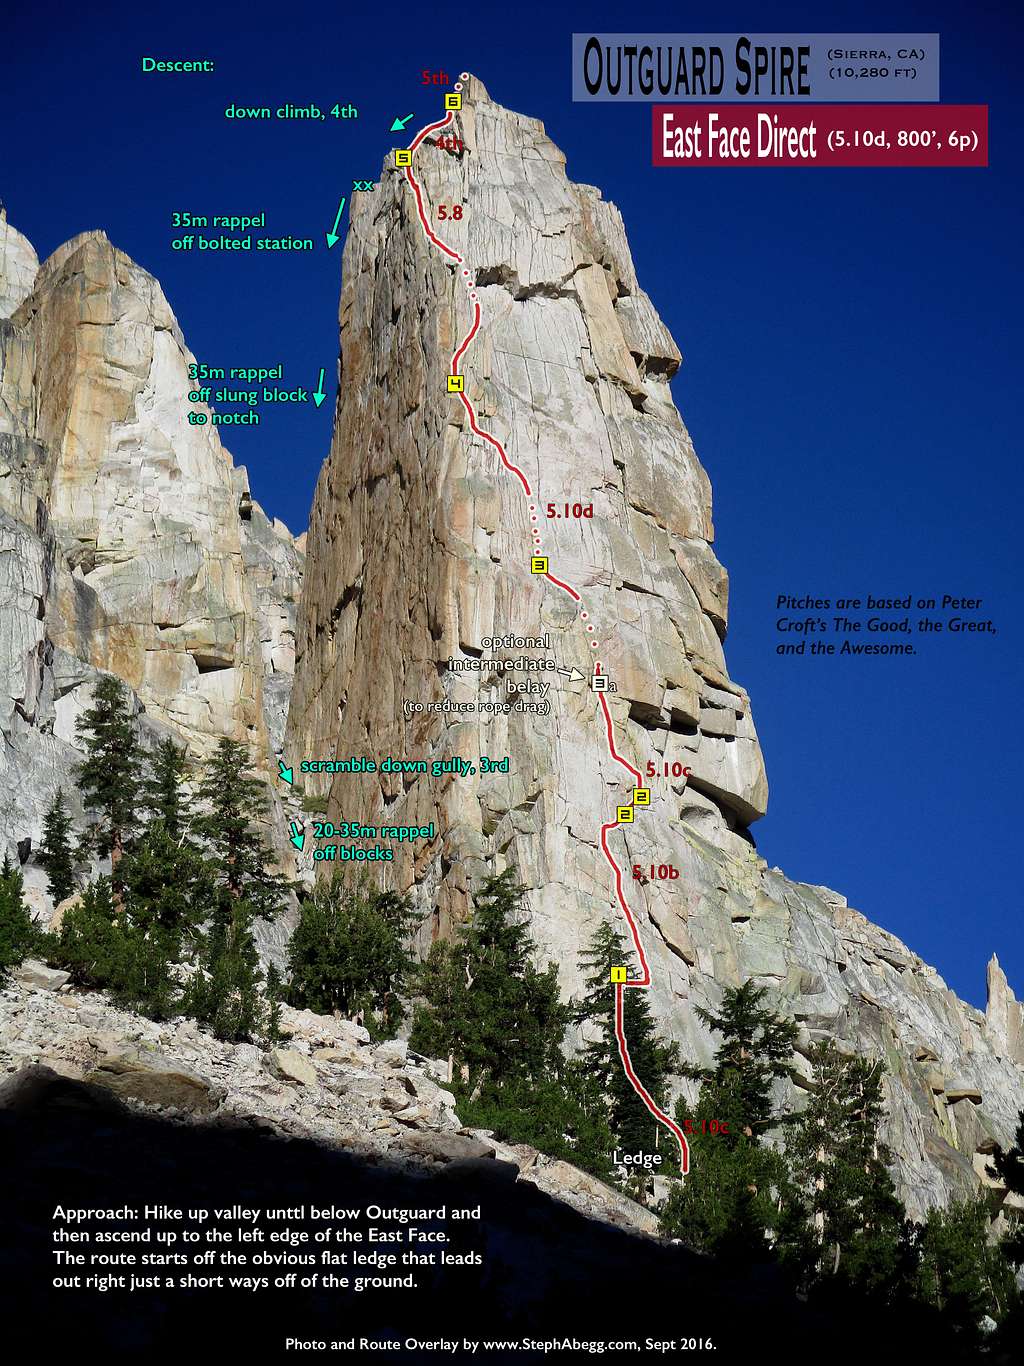 Route Overlay Outguard Spire East Face